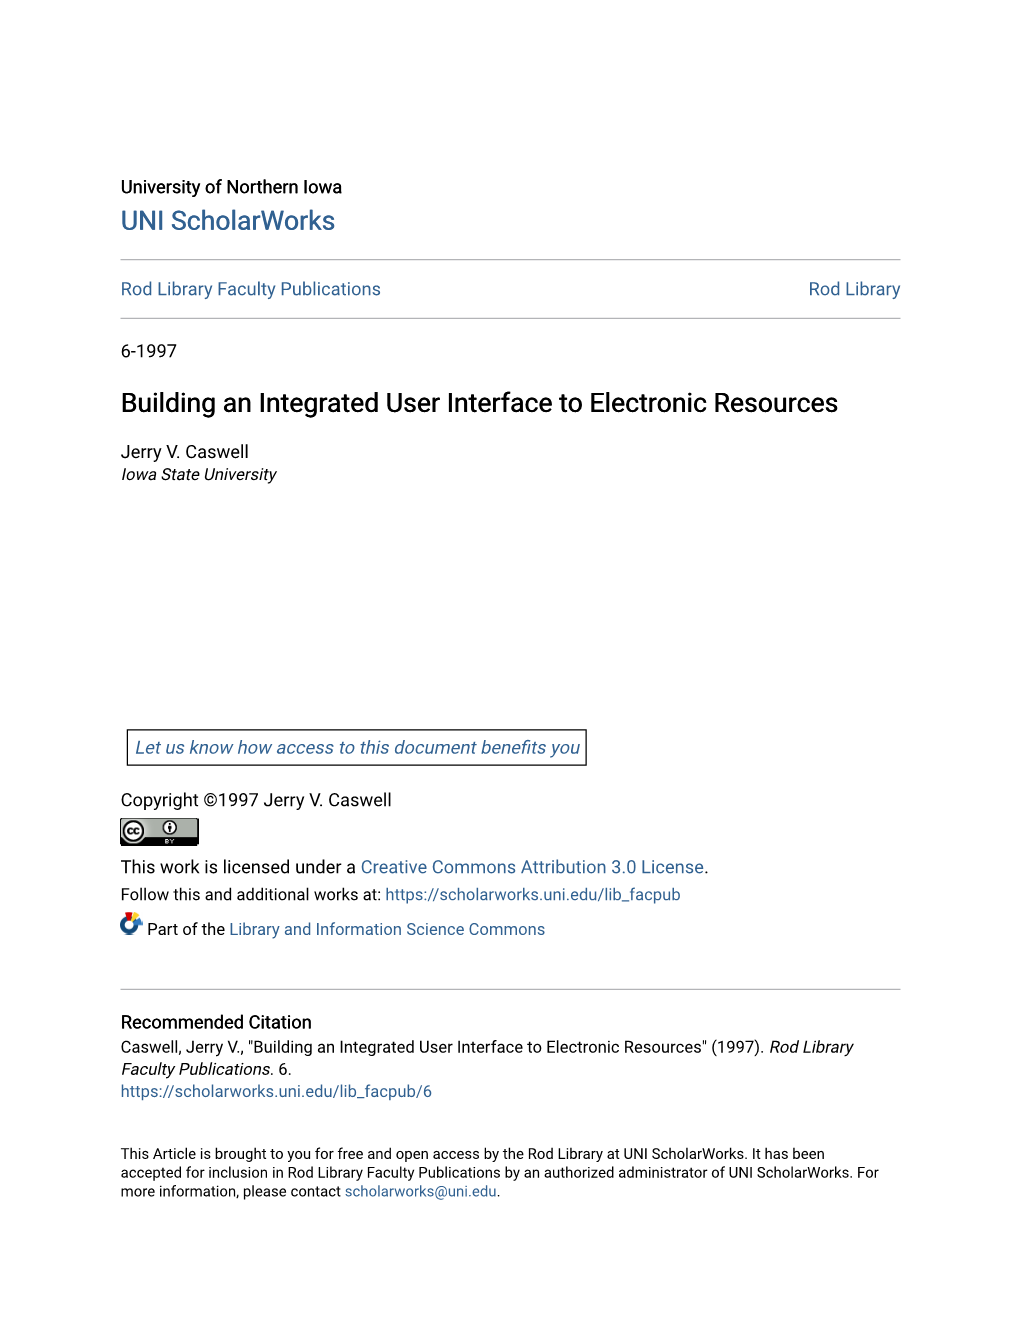 Building an Integrated User Interface to Electronic Resources